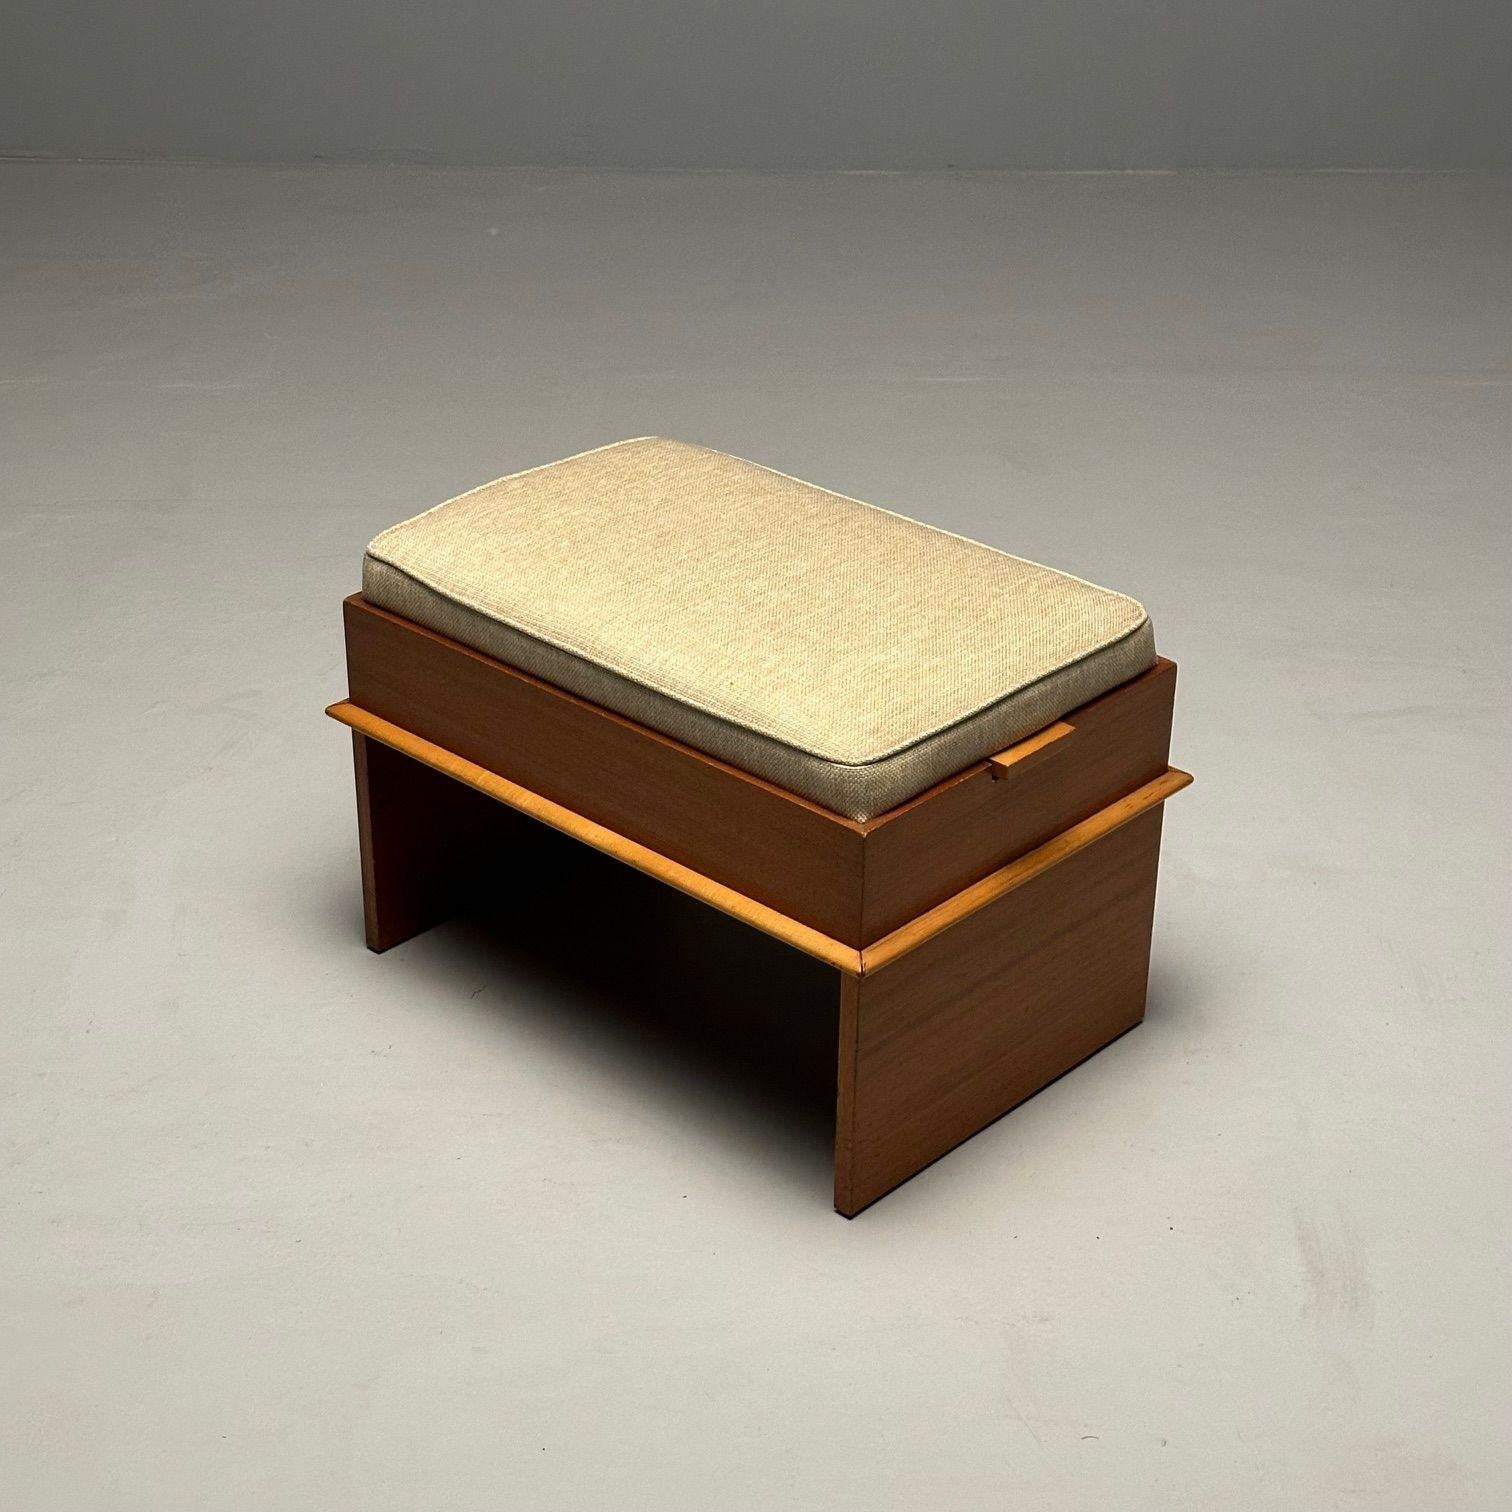 Rare Mid-Century Modern Paul Frankl / John Stuart Storage Ottoman, Footstool

Paul Frankl for Johnson Furniture Co. and retailed by John Stuart. Branded Johnson Furniture Co. and labeled Johnson Furniture Co. to on the underside of the bench.